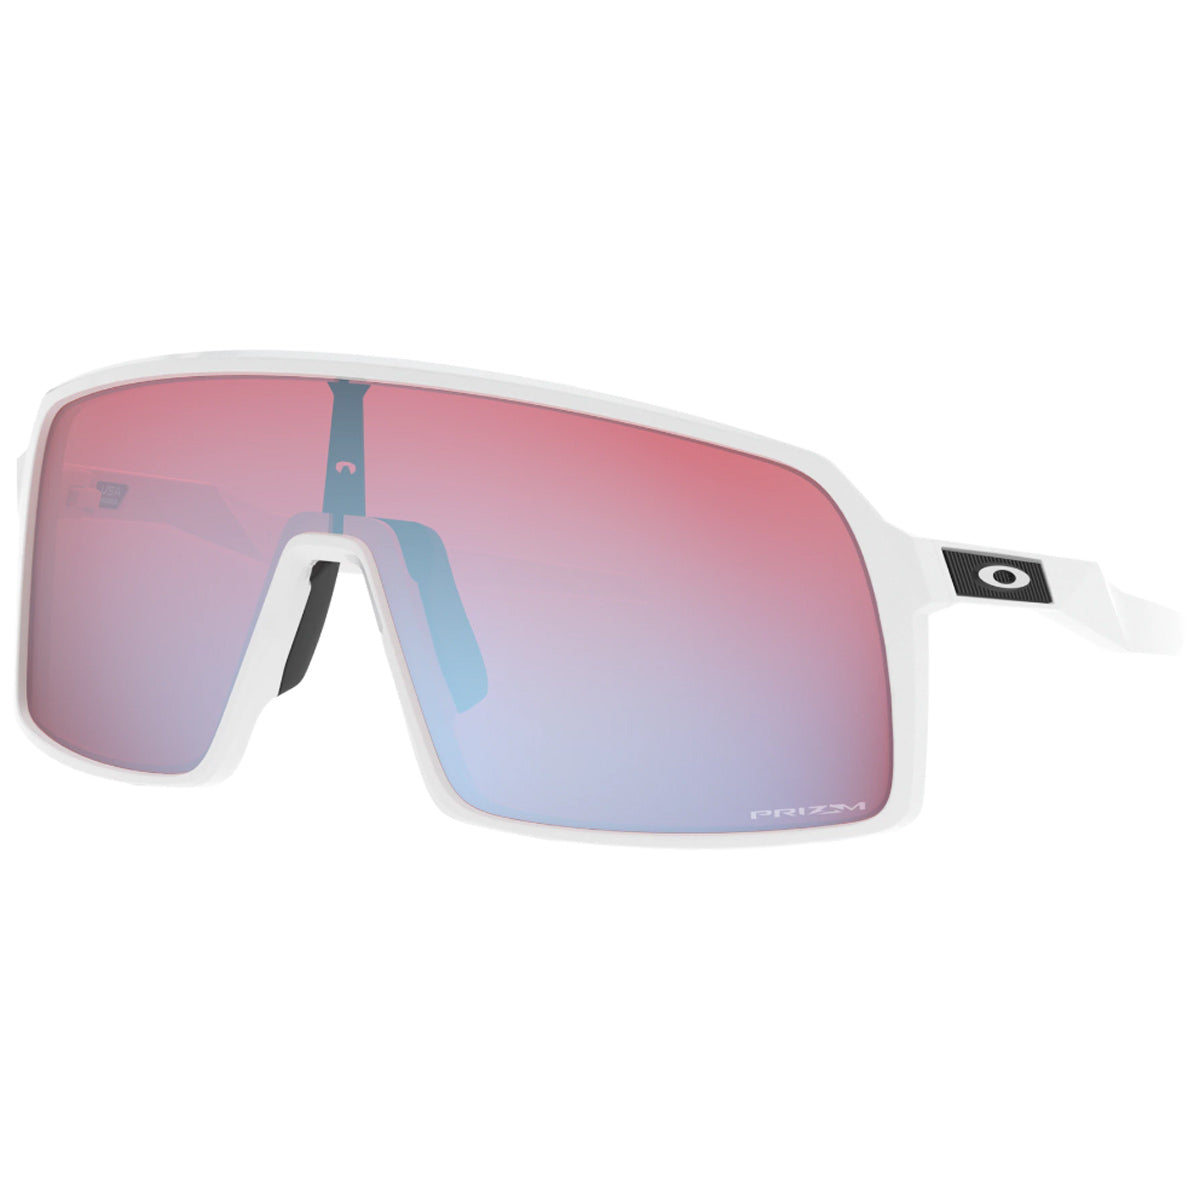 Oakley Sutro sunglasses - Polished White Prizm Snow Sapphire | All4cycling